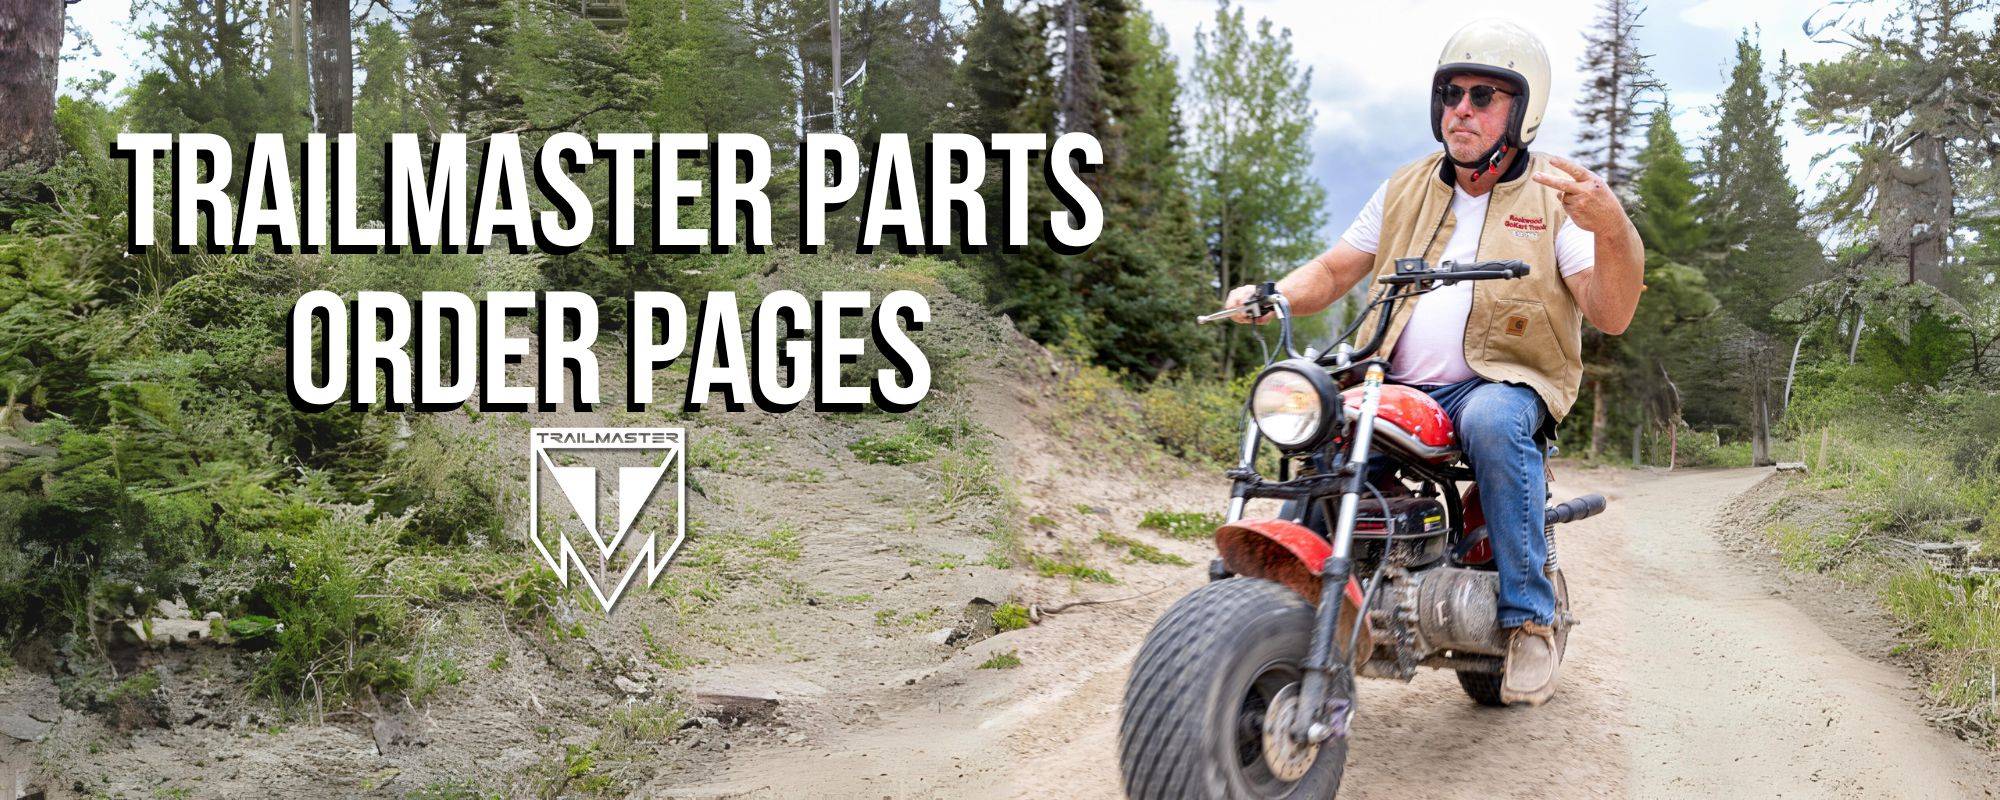 TrailMaster Parts Order Pages. Tim Yochum on a TrailMaster MB200-2 Mini Bike with a Super Stage 1 Kit in the Colorado Mountains. Throwing up the peace sign as he rides.